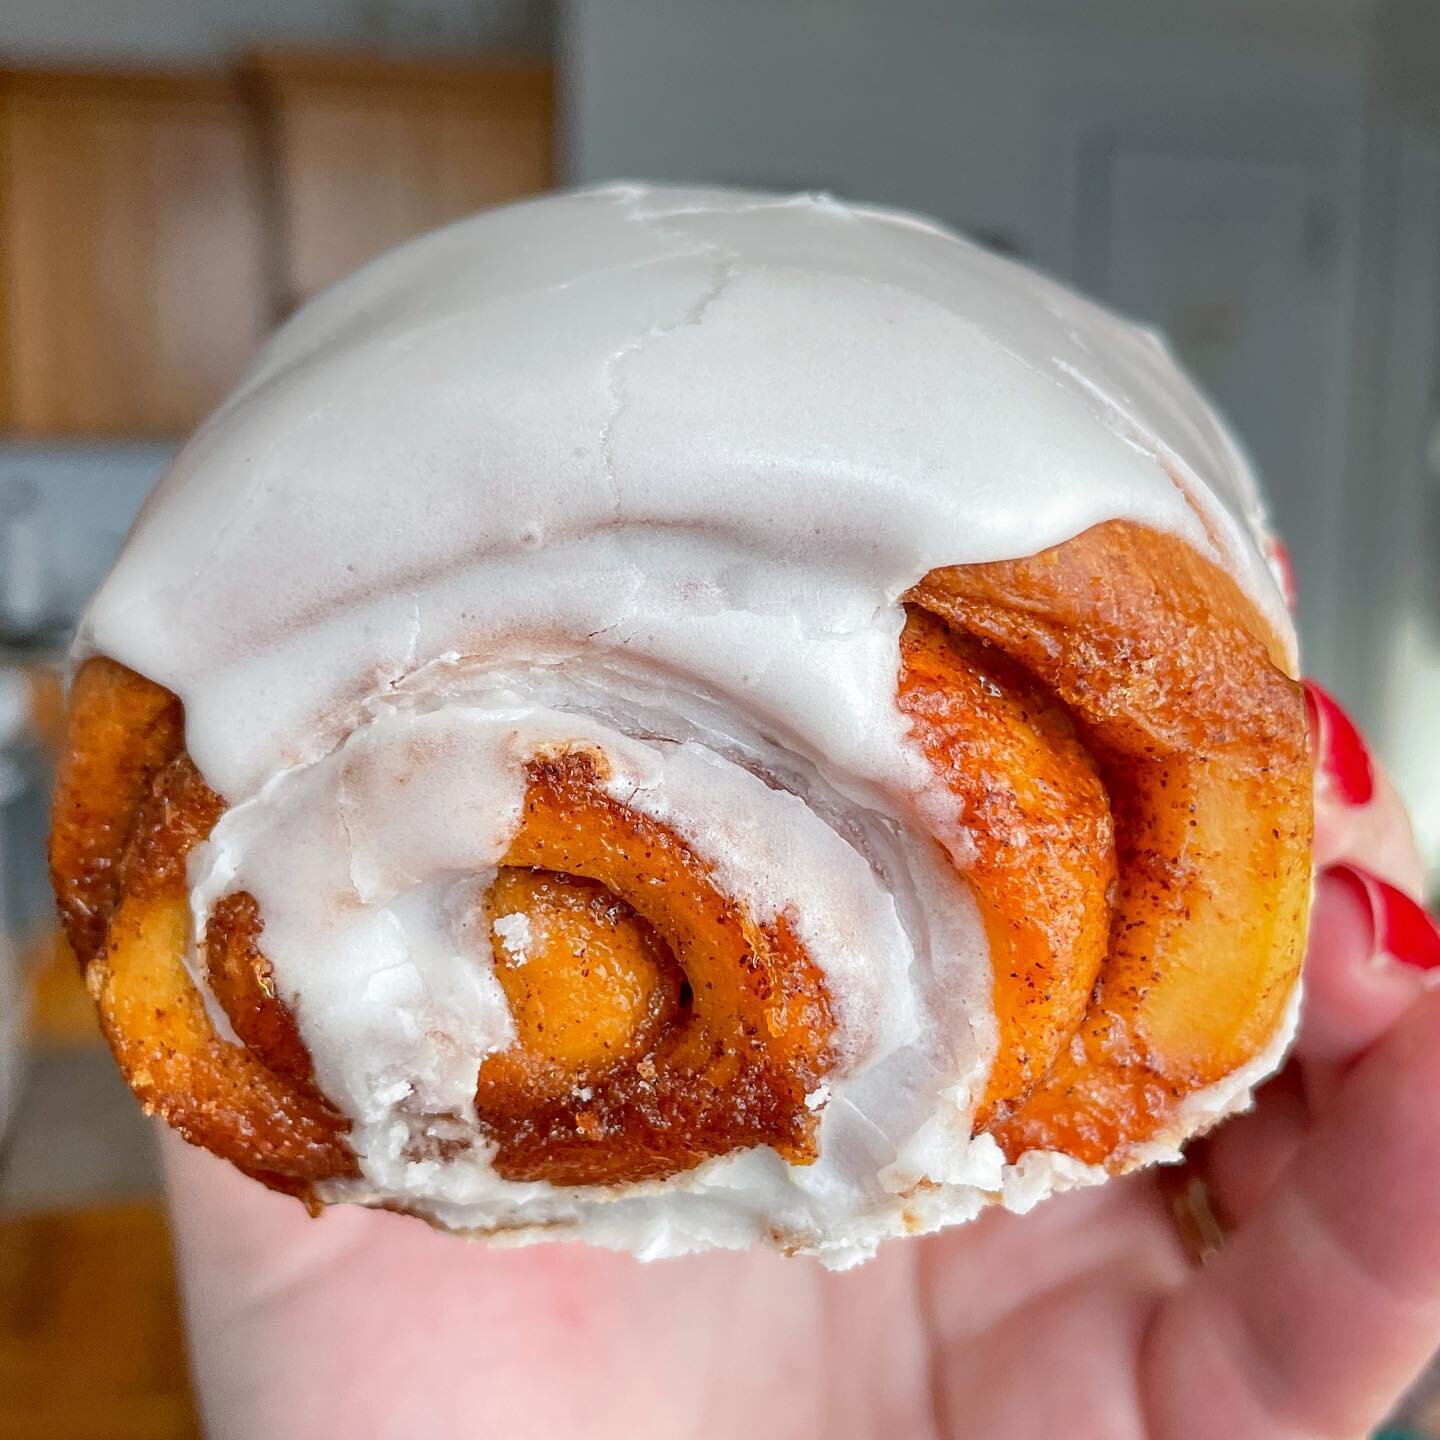 Call me cinnamon, &lsquo;cause I&rsquo;m on a roll.
📍: @citycakes 
This is the Sideways Cinna, and it&rsquo;s available from the new City Cakes location, which is super cool, and worth stopping in when you can!
.
.
.
.
.
.
.
#cinnamonroll #citycakes